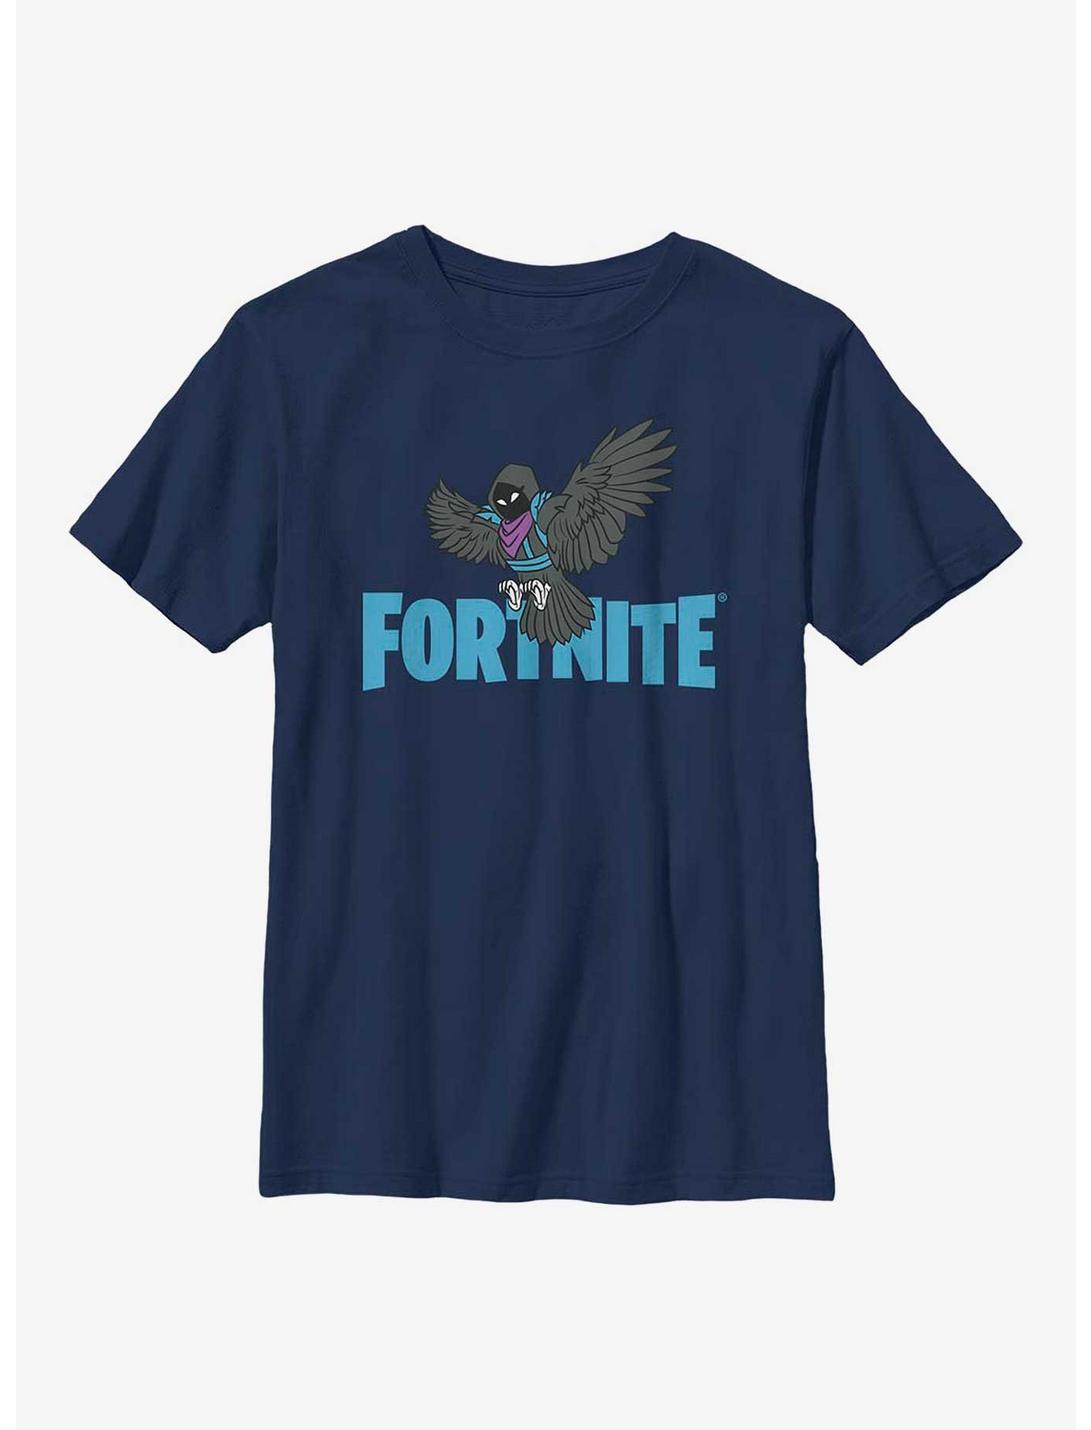 Fortnite Raven Wings Youth T-Shirt, NAVY, hi-res